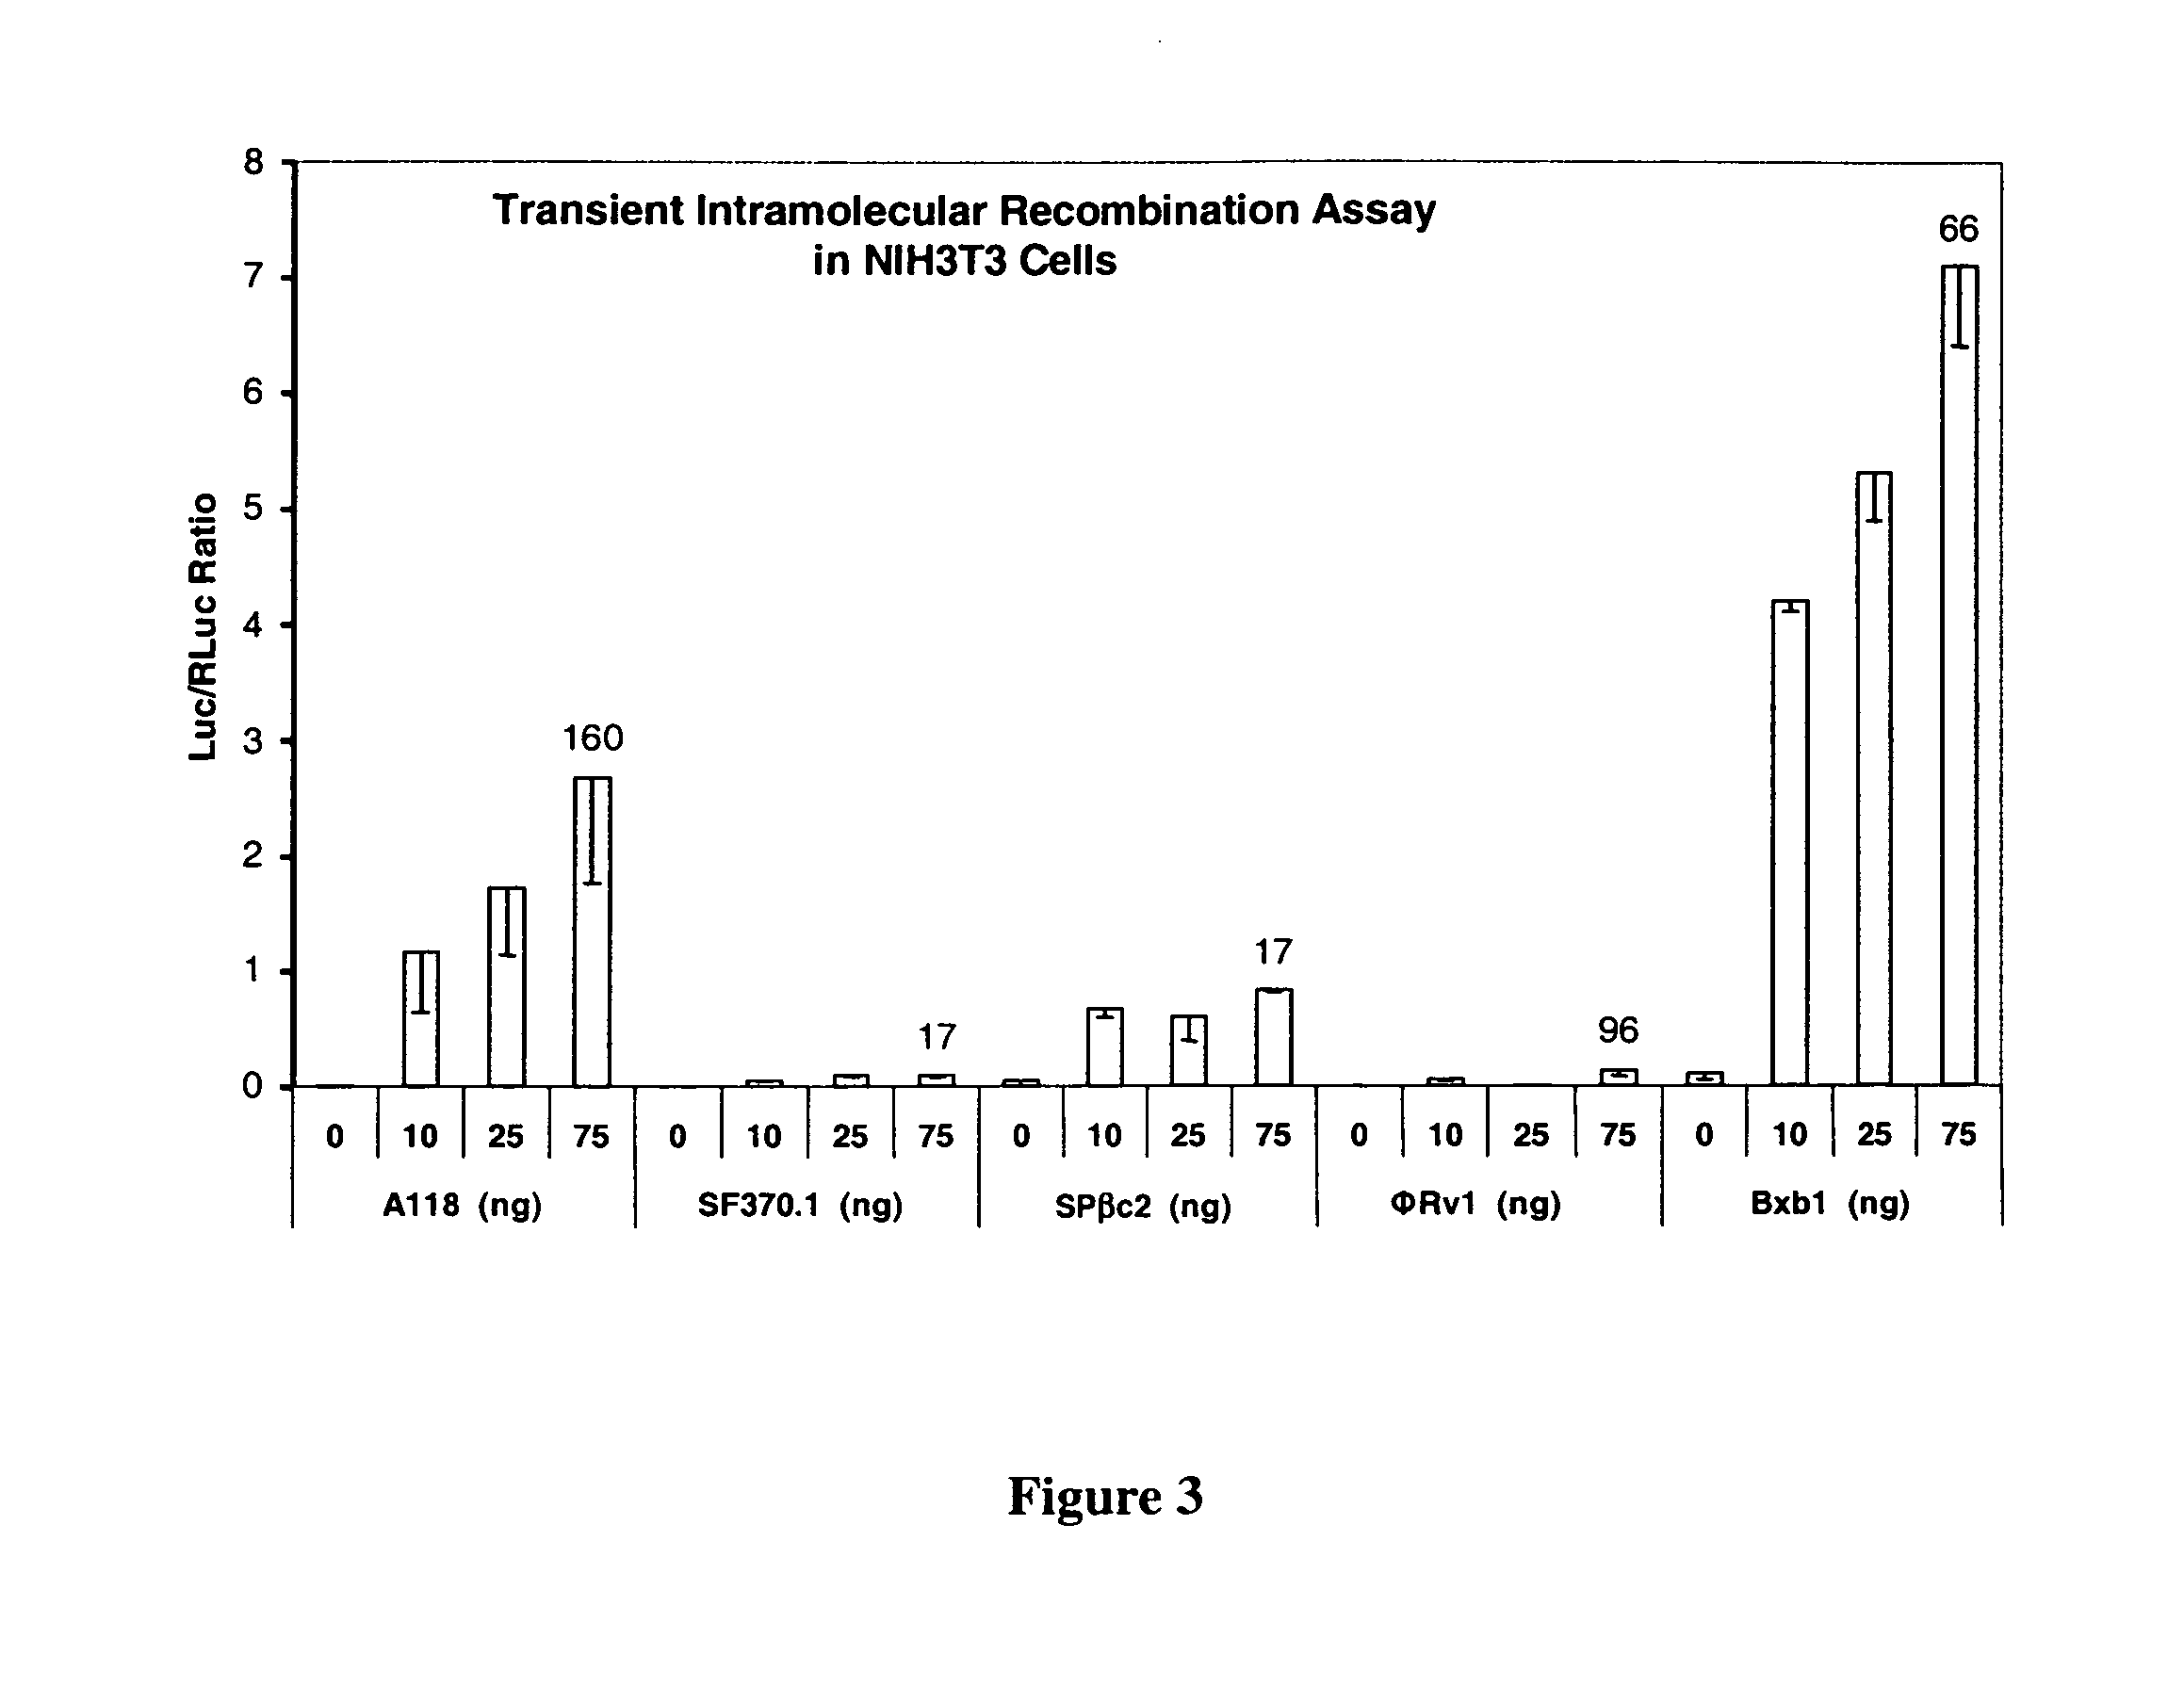 Site-specific serine recombinases and methods of their use